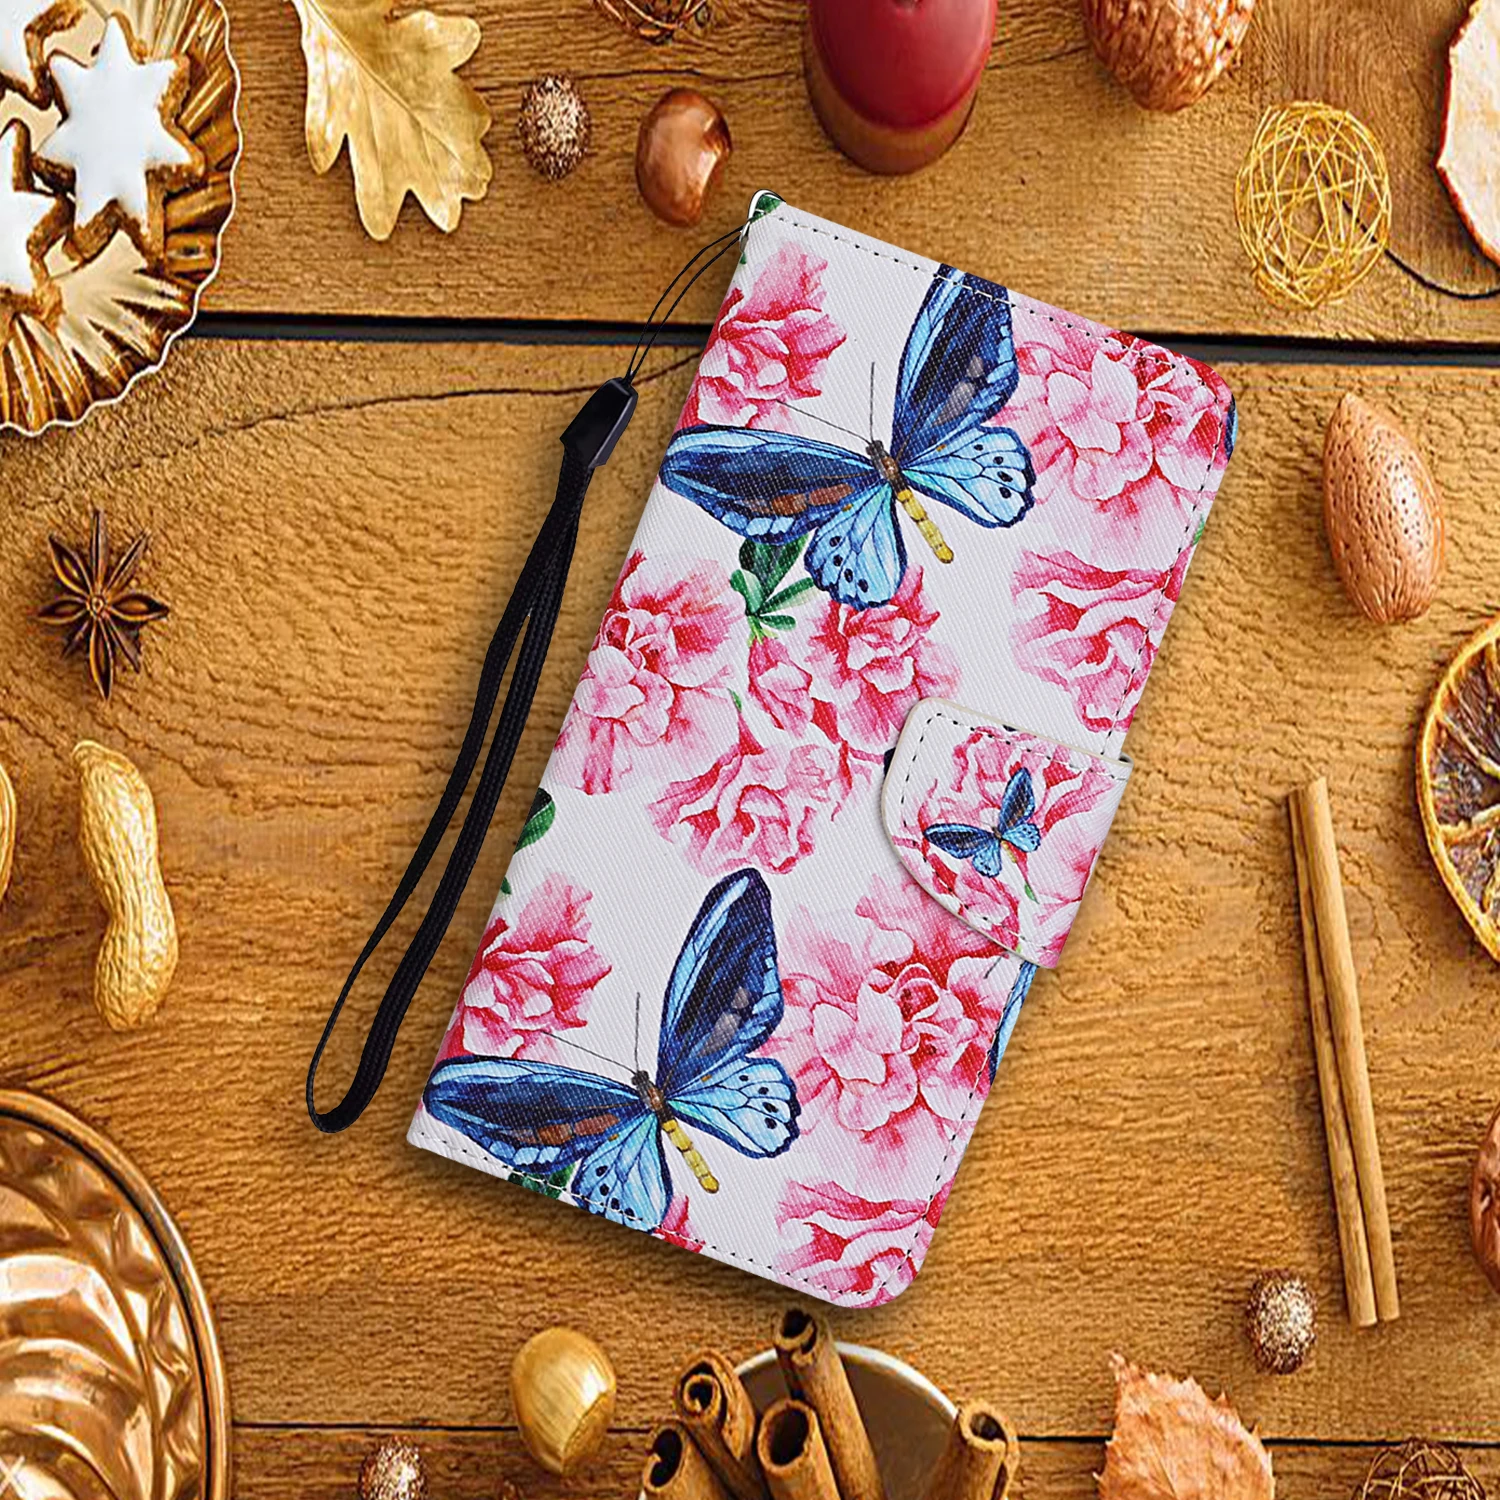 xiaomi leather case hard Leather Case For Xiaomi Mi 10T 10 T 5G Case For Xiomi Mi10T Pro Lite Mi Note 10 Pro Note10 Lite Case Flip Wallet Painted Cover xiaomi leather case case